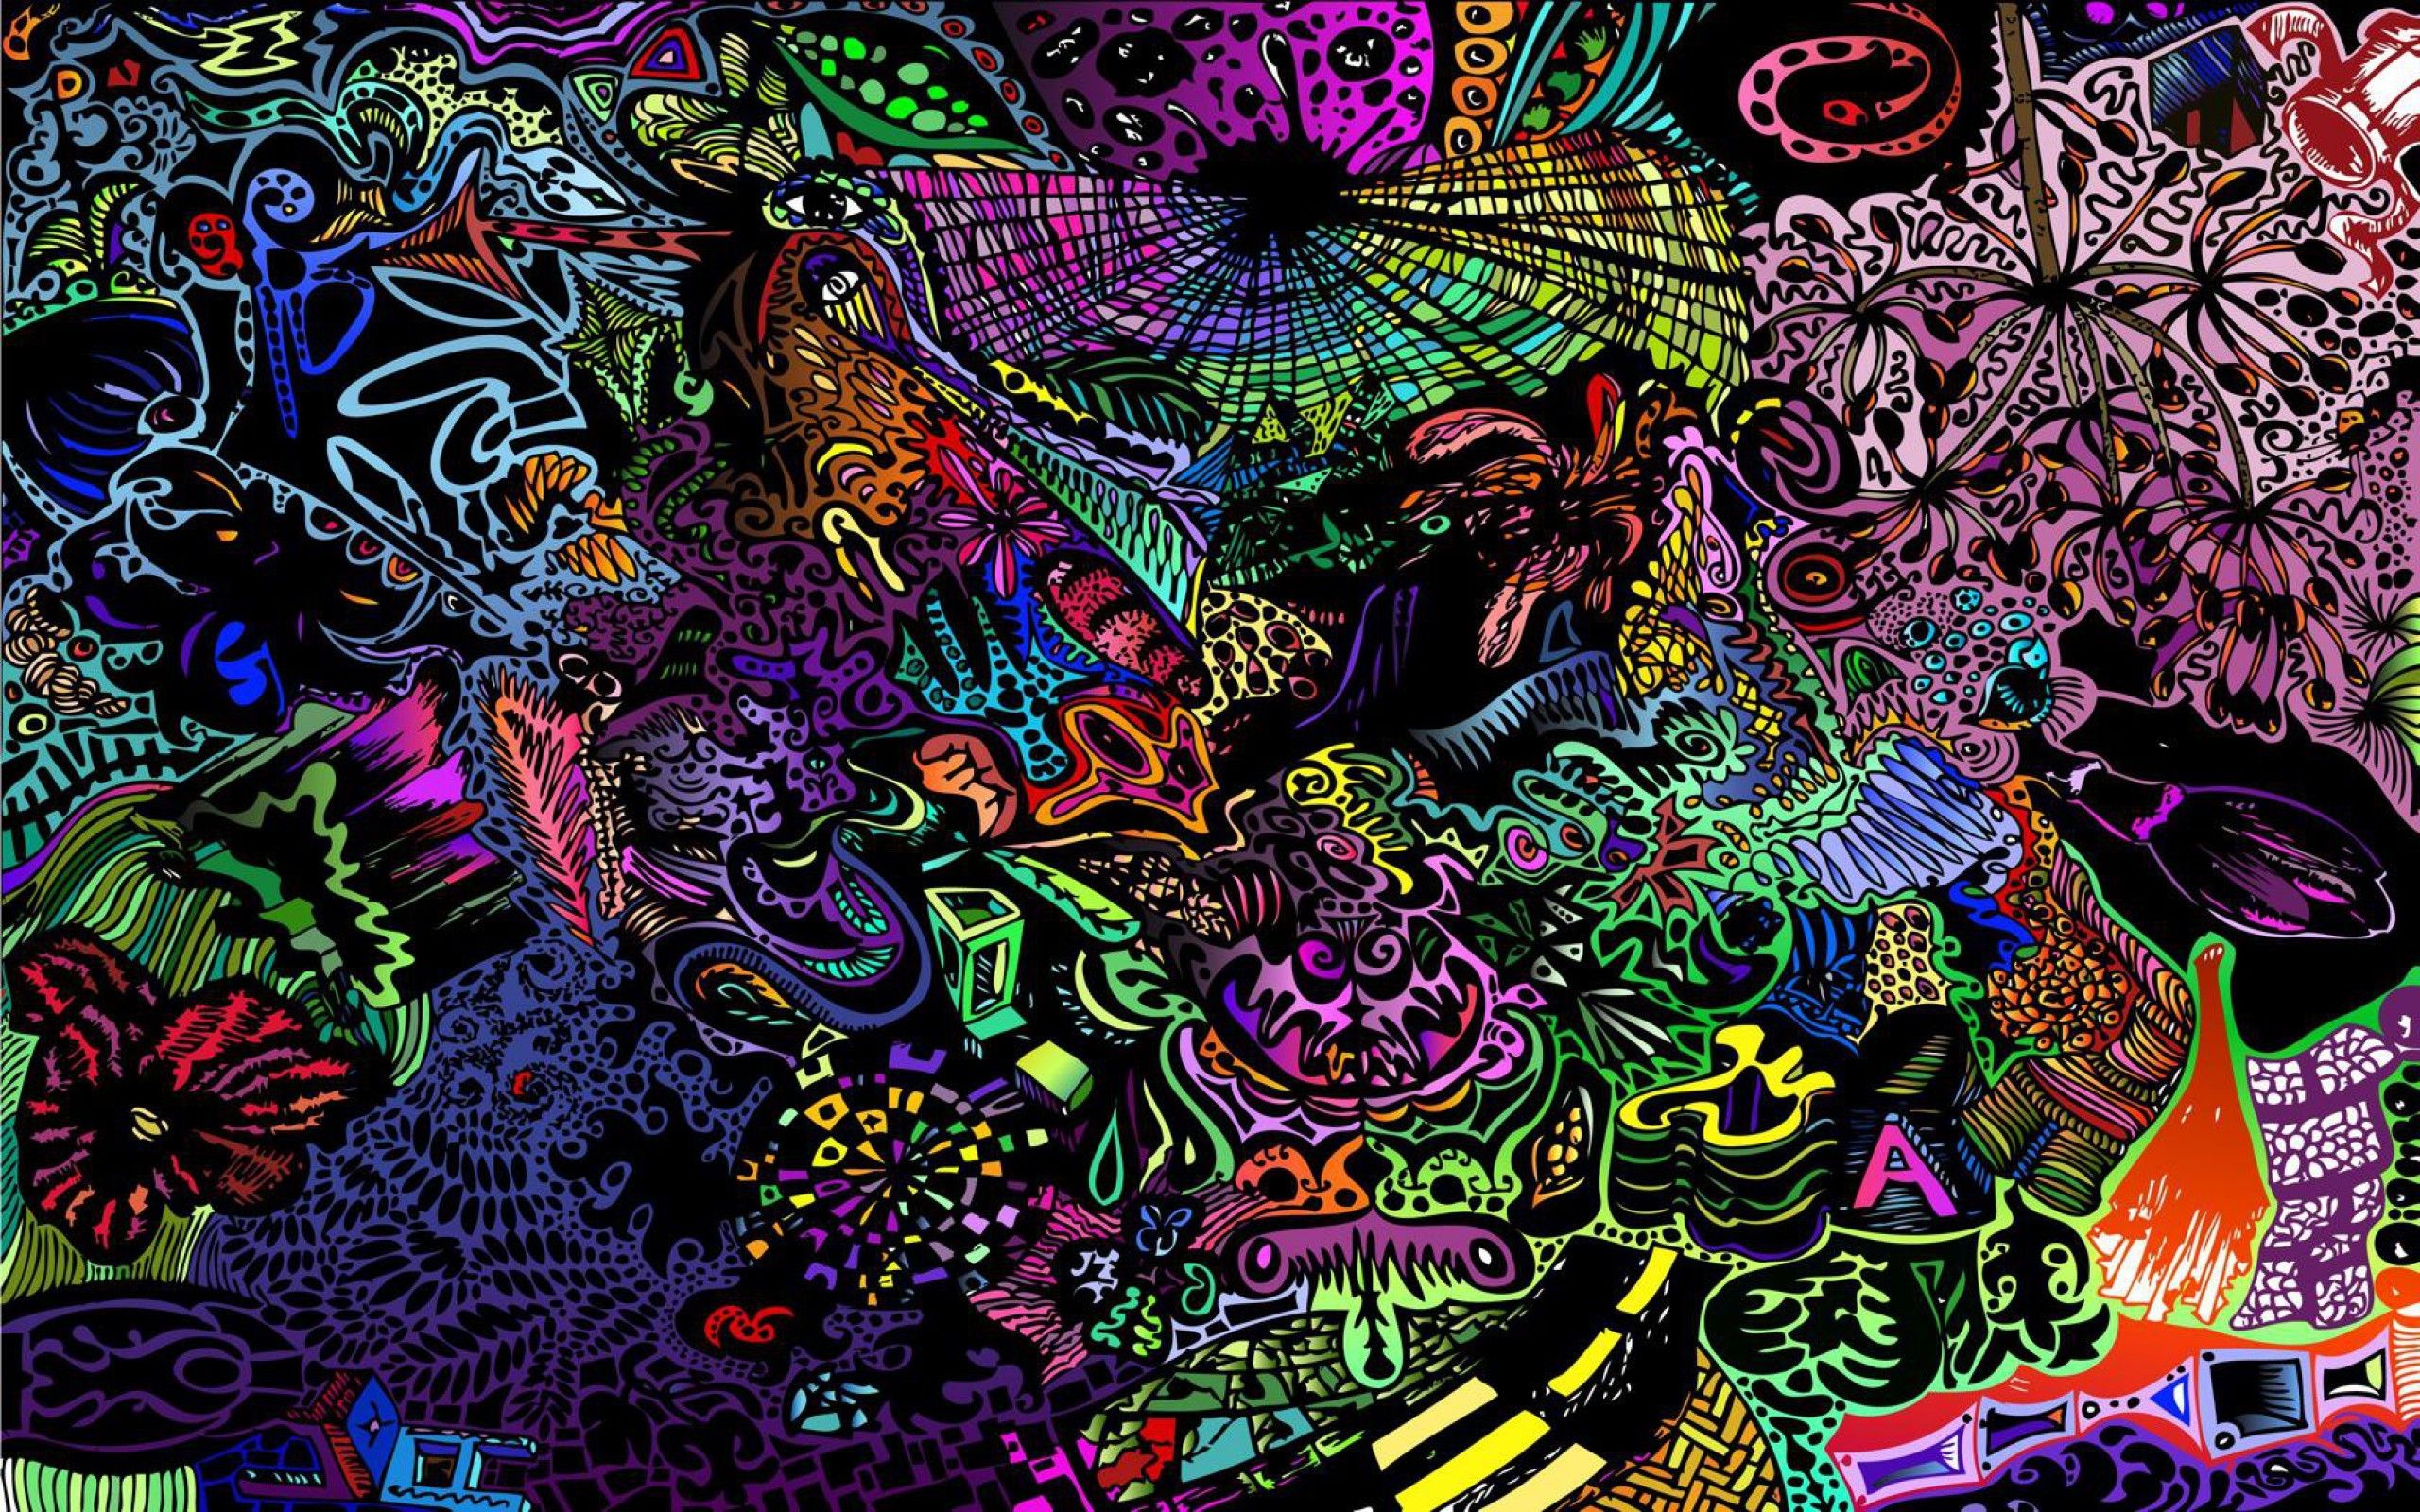 cool trippy weed backgrounds